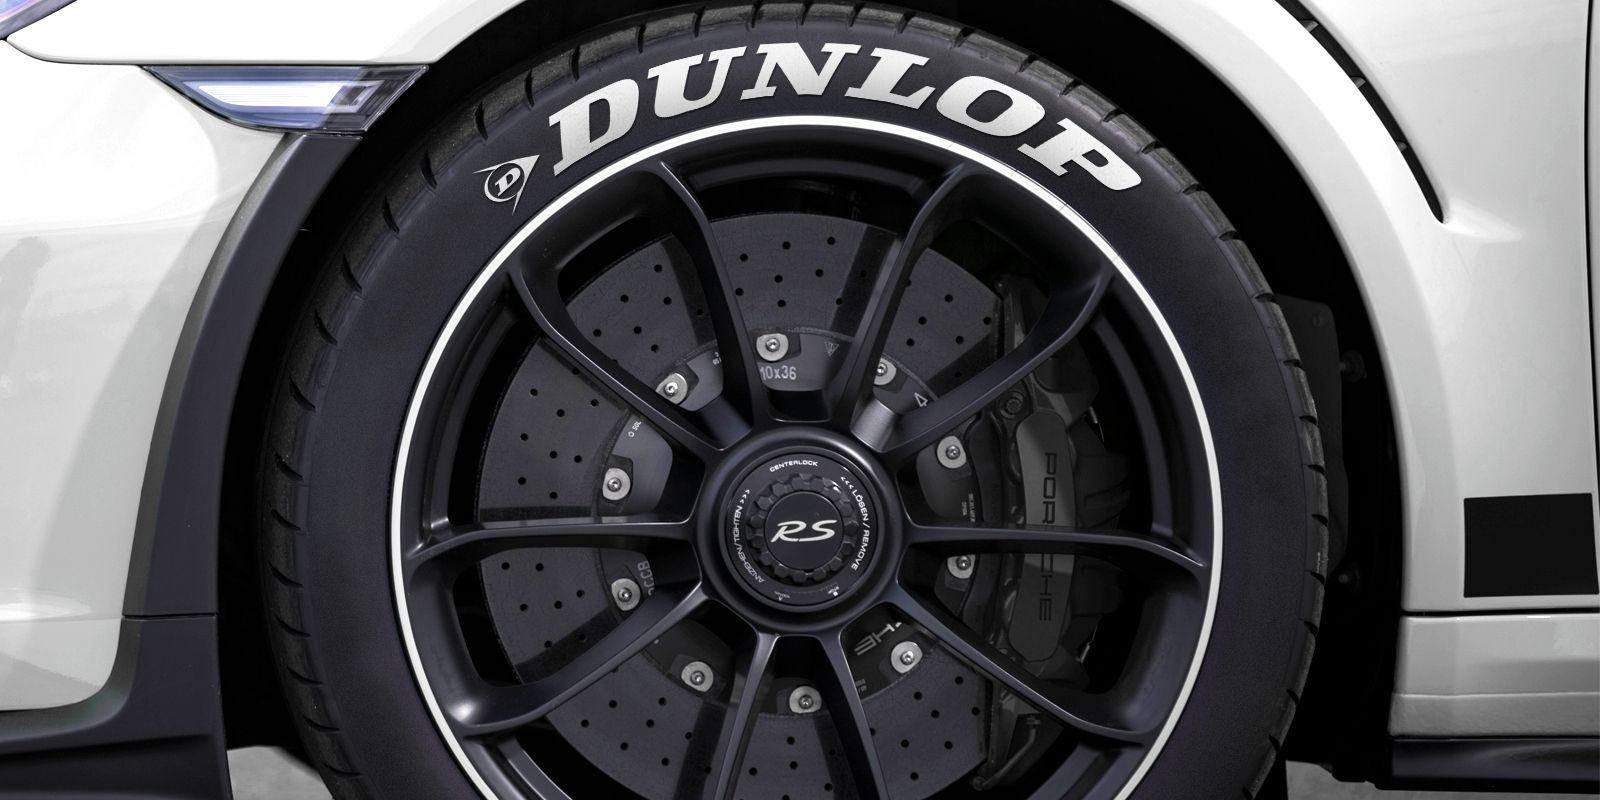 Dunlop Tyre on white car